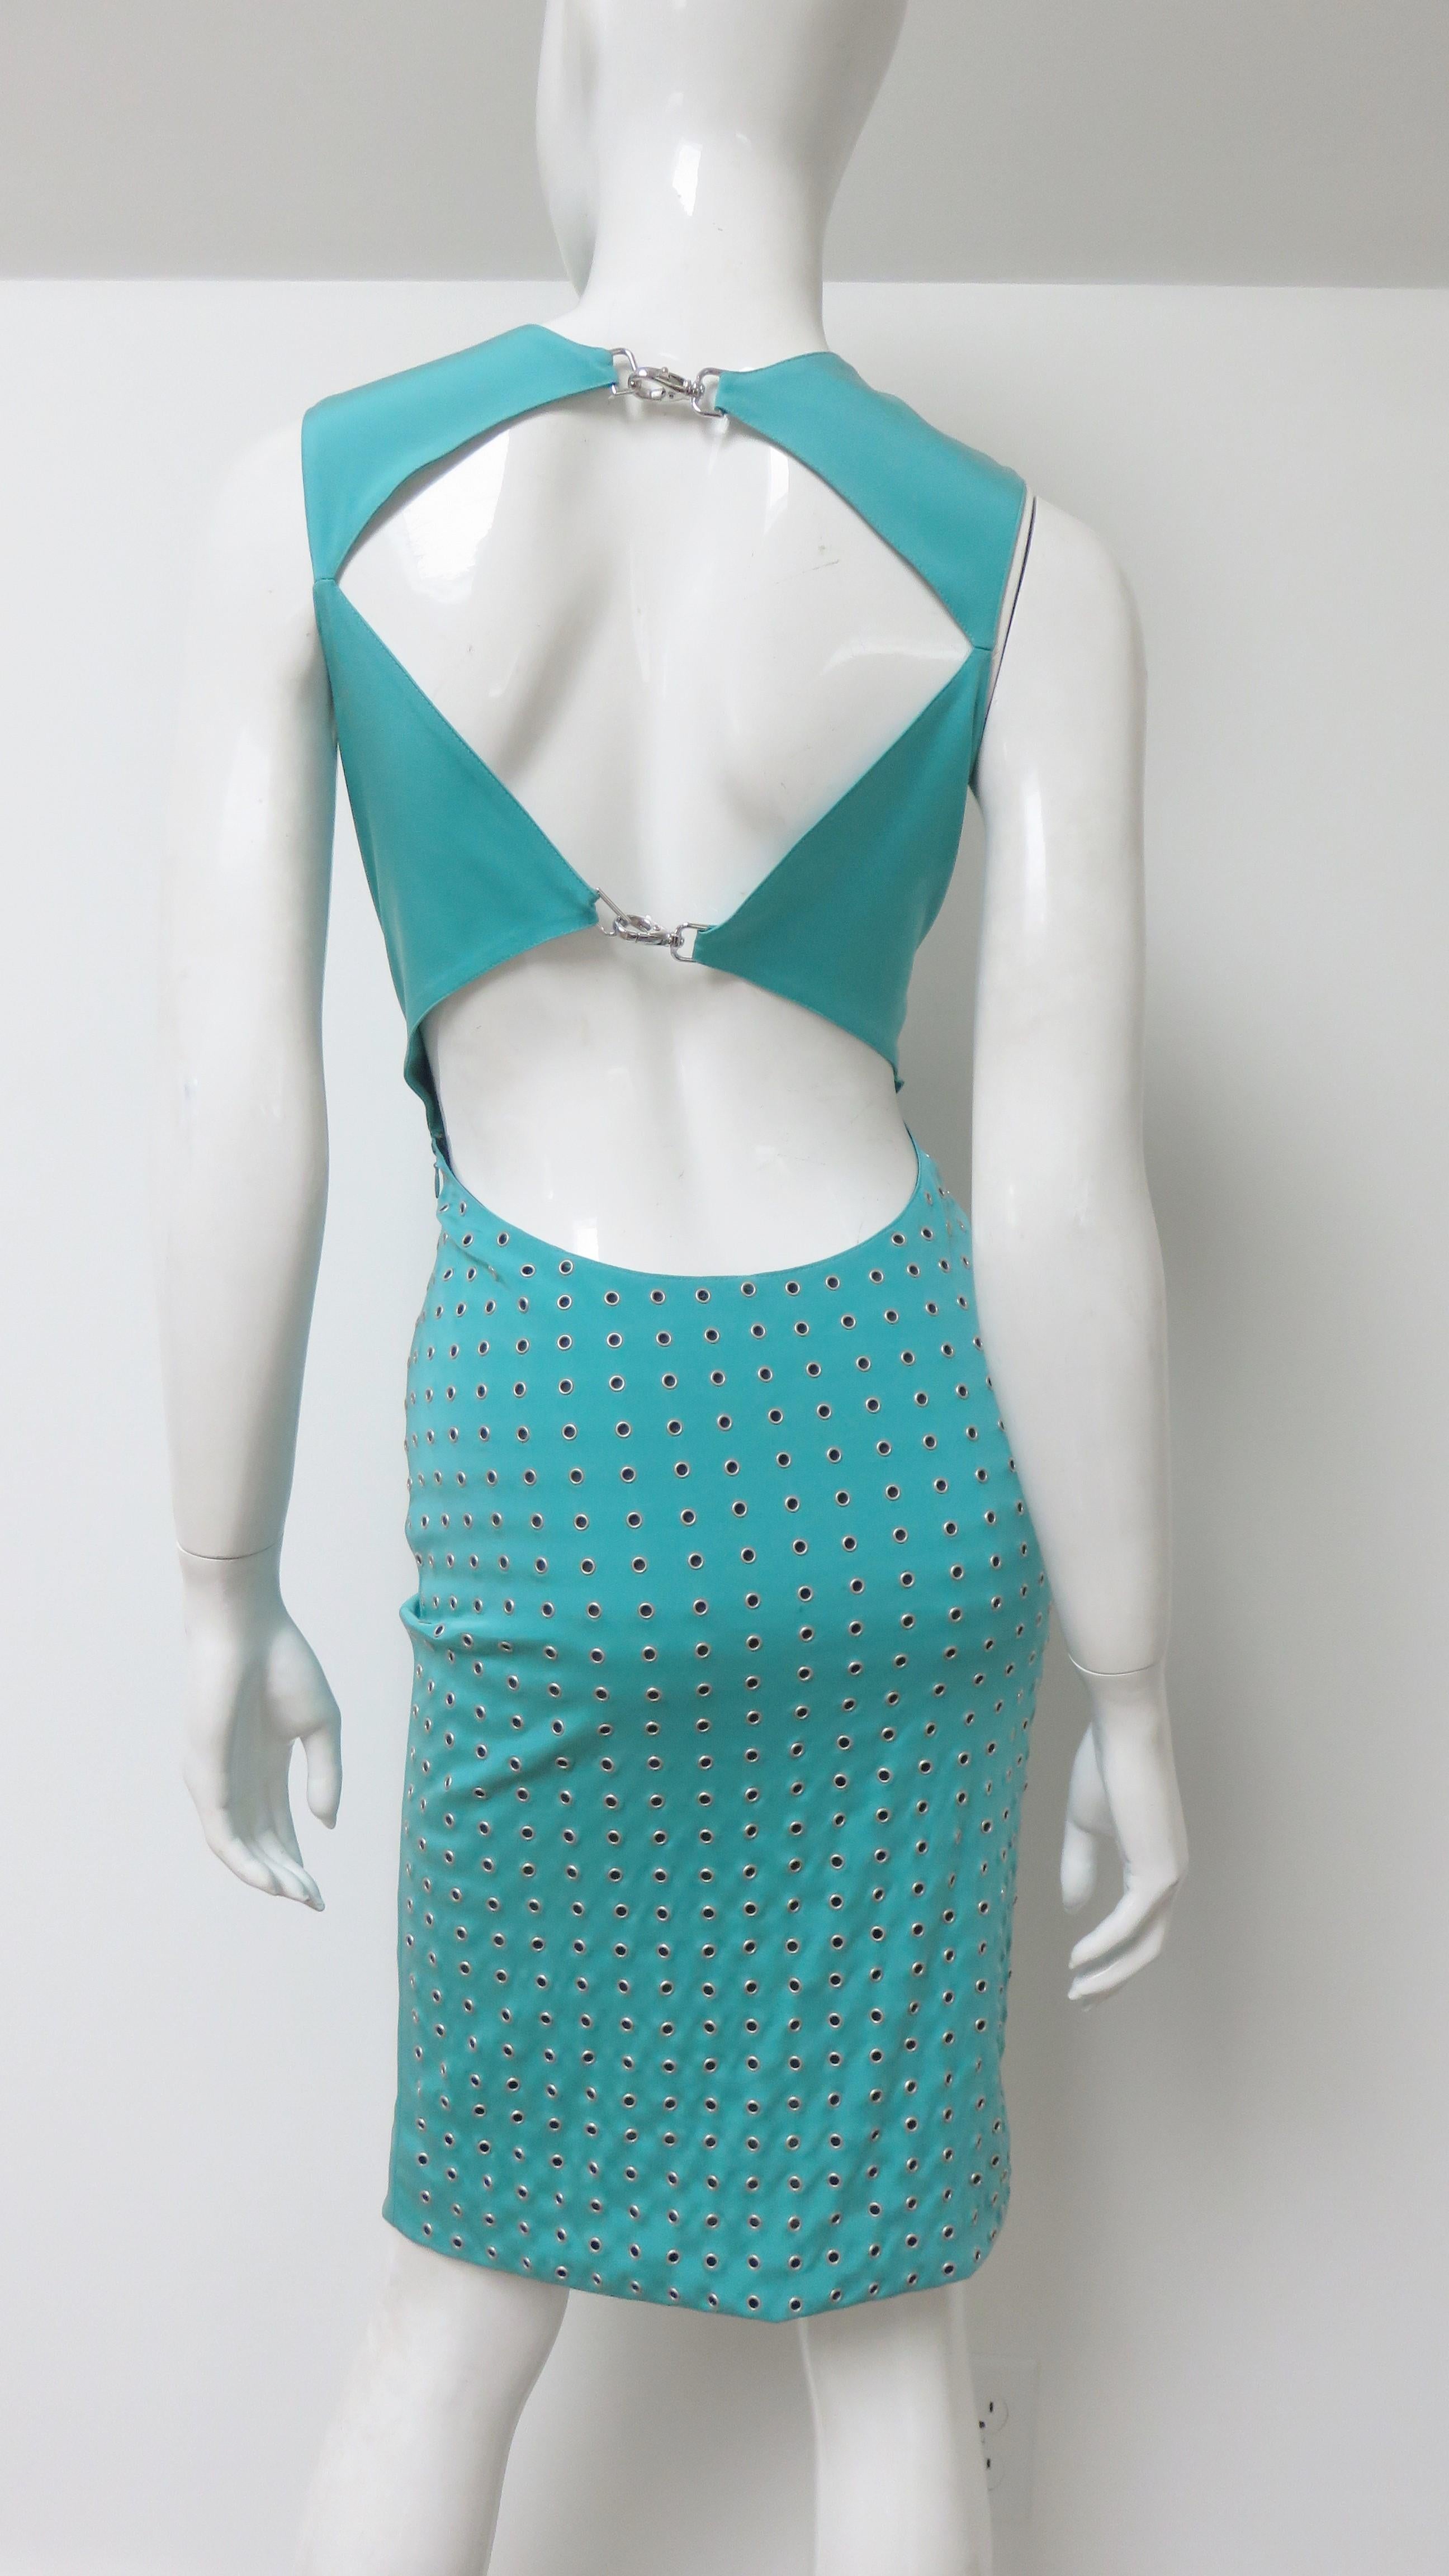 A fabulous turquoise stretch silk dress from Gianni Versace.  From the front is it a simple fitted sleeveless dress. The back is dramatic and detailed in contrast with cut outs at the upper back and waist closing with silver metal clasps. The skirt